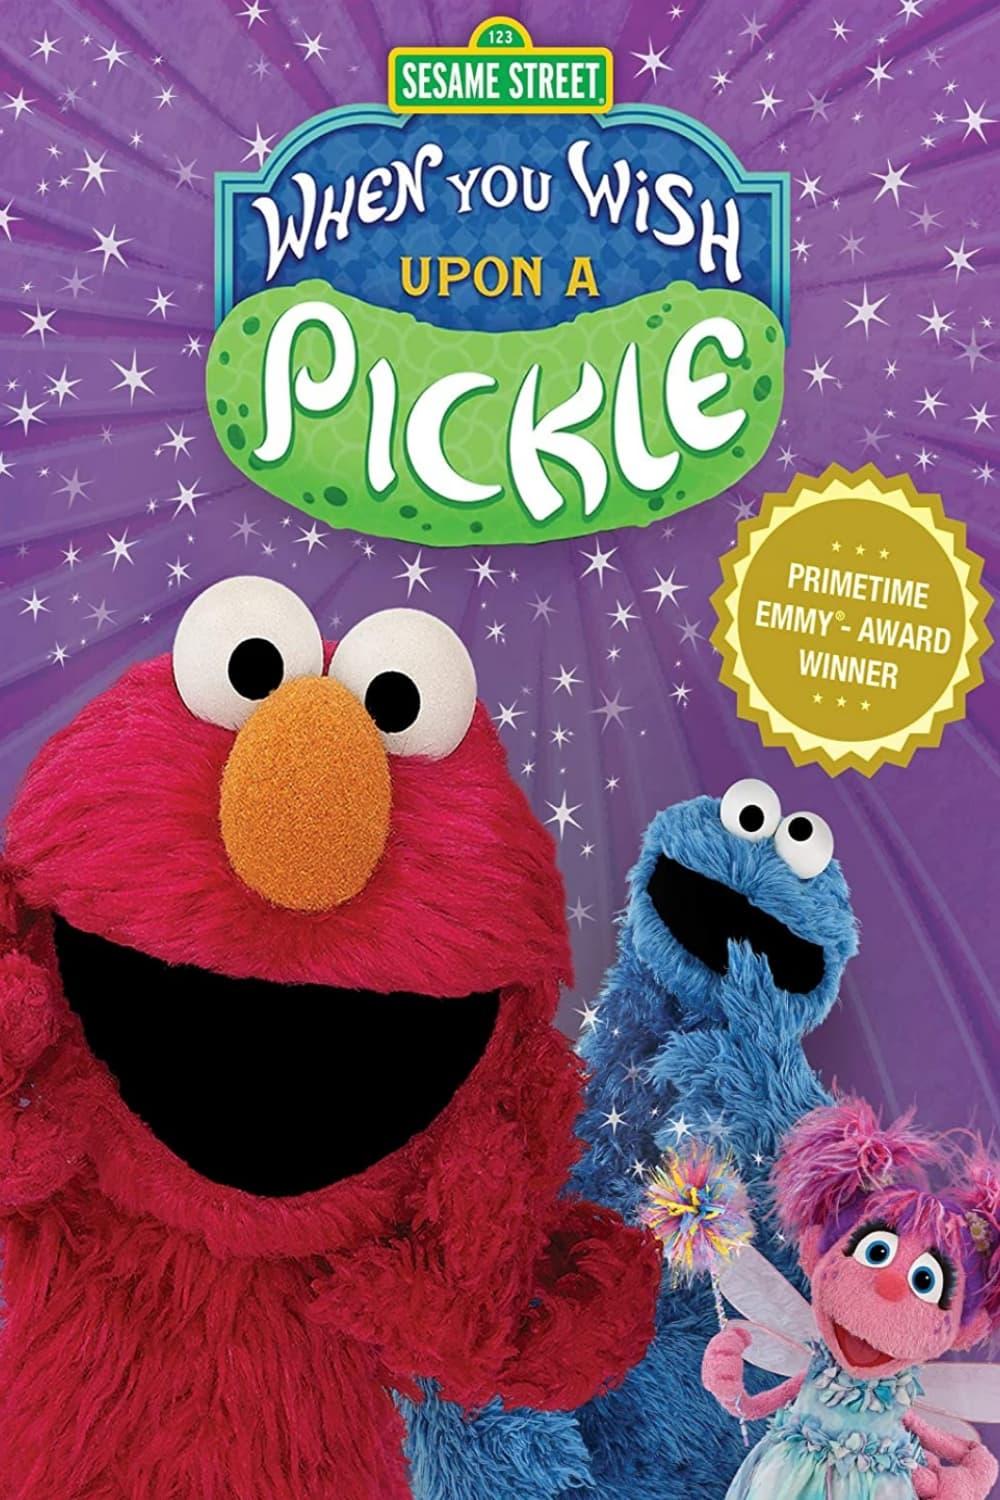 When You Wish Upon a Pickle: A Sesame Street Special poster